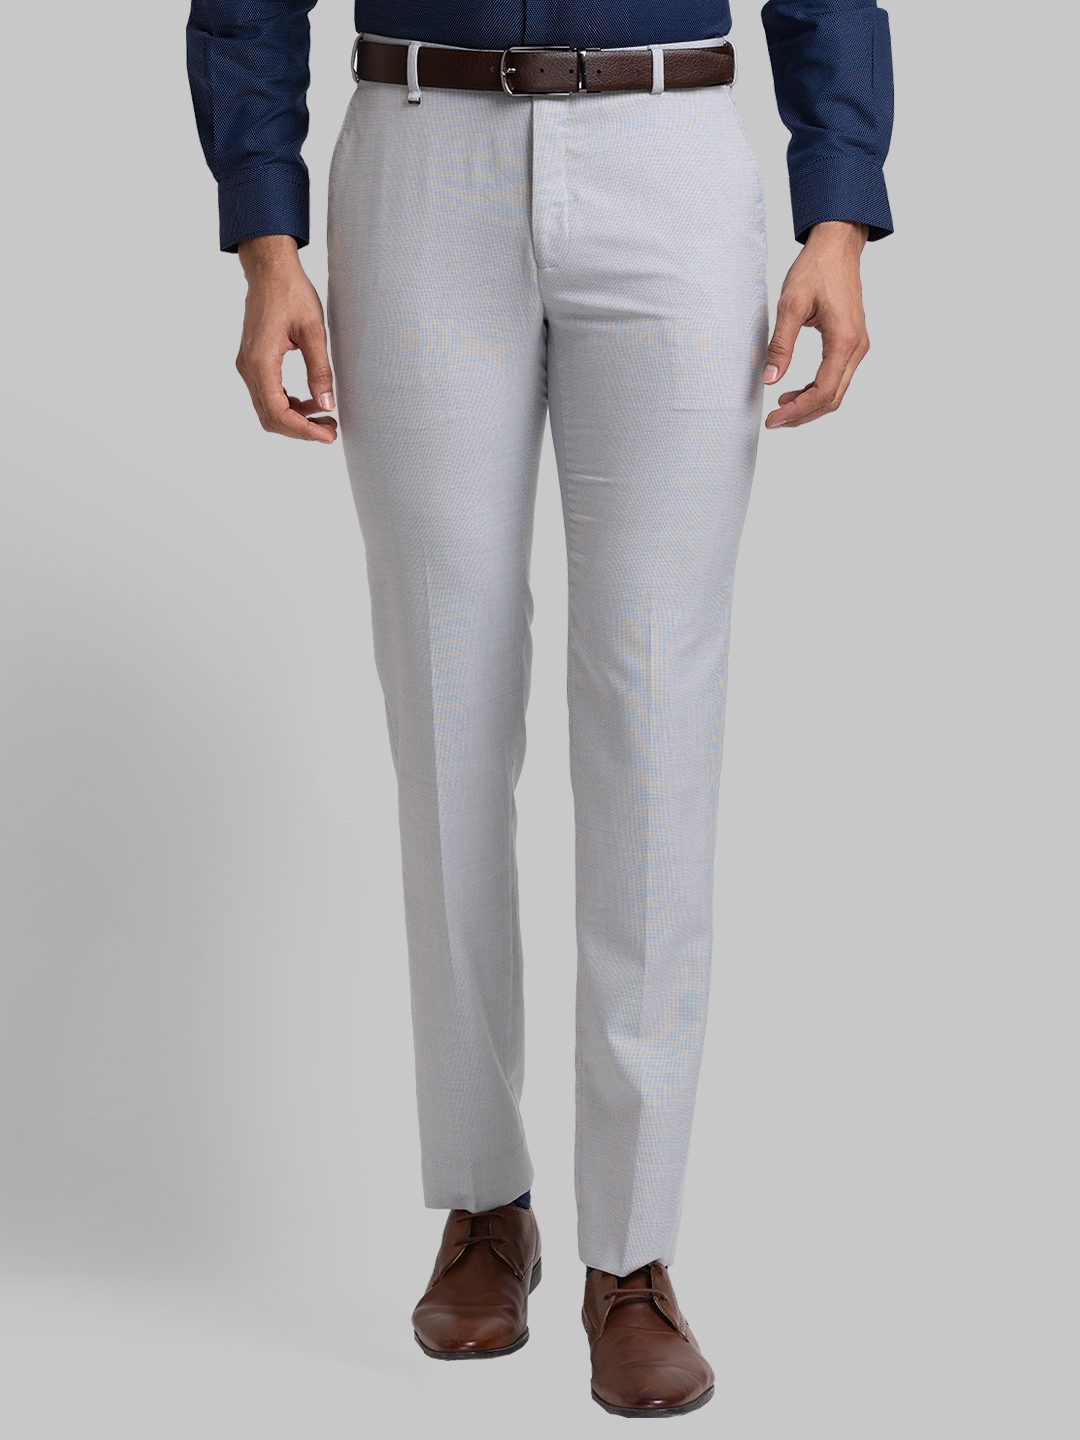 Buy Raymond Men Blue Slim Fit Solid Formal Trousers - Trousers for Men  10854568 | Myntra